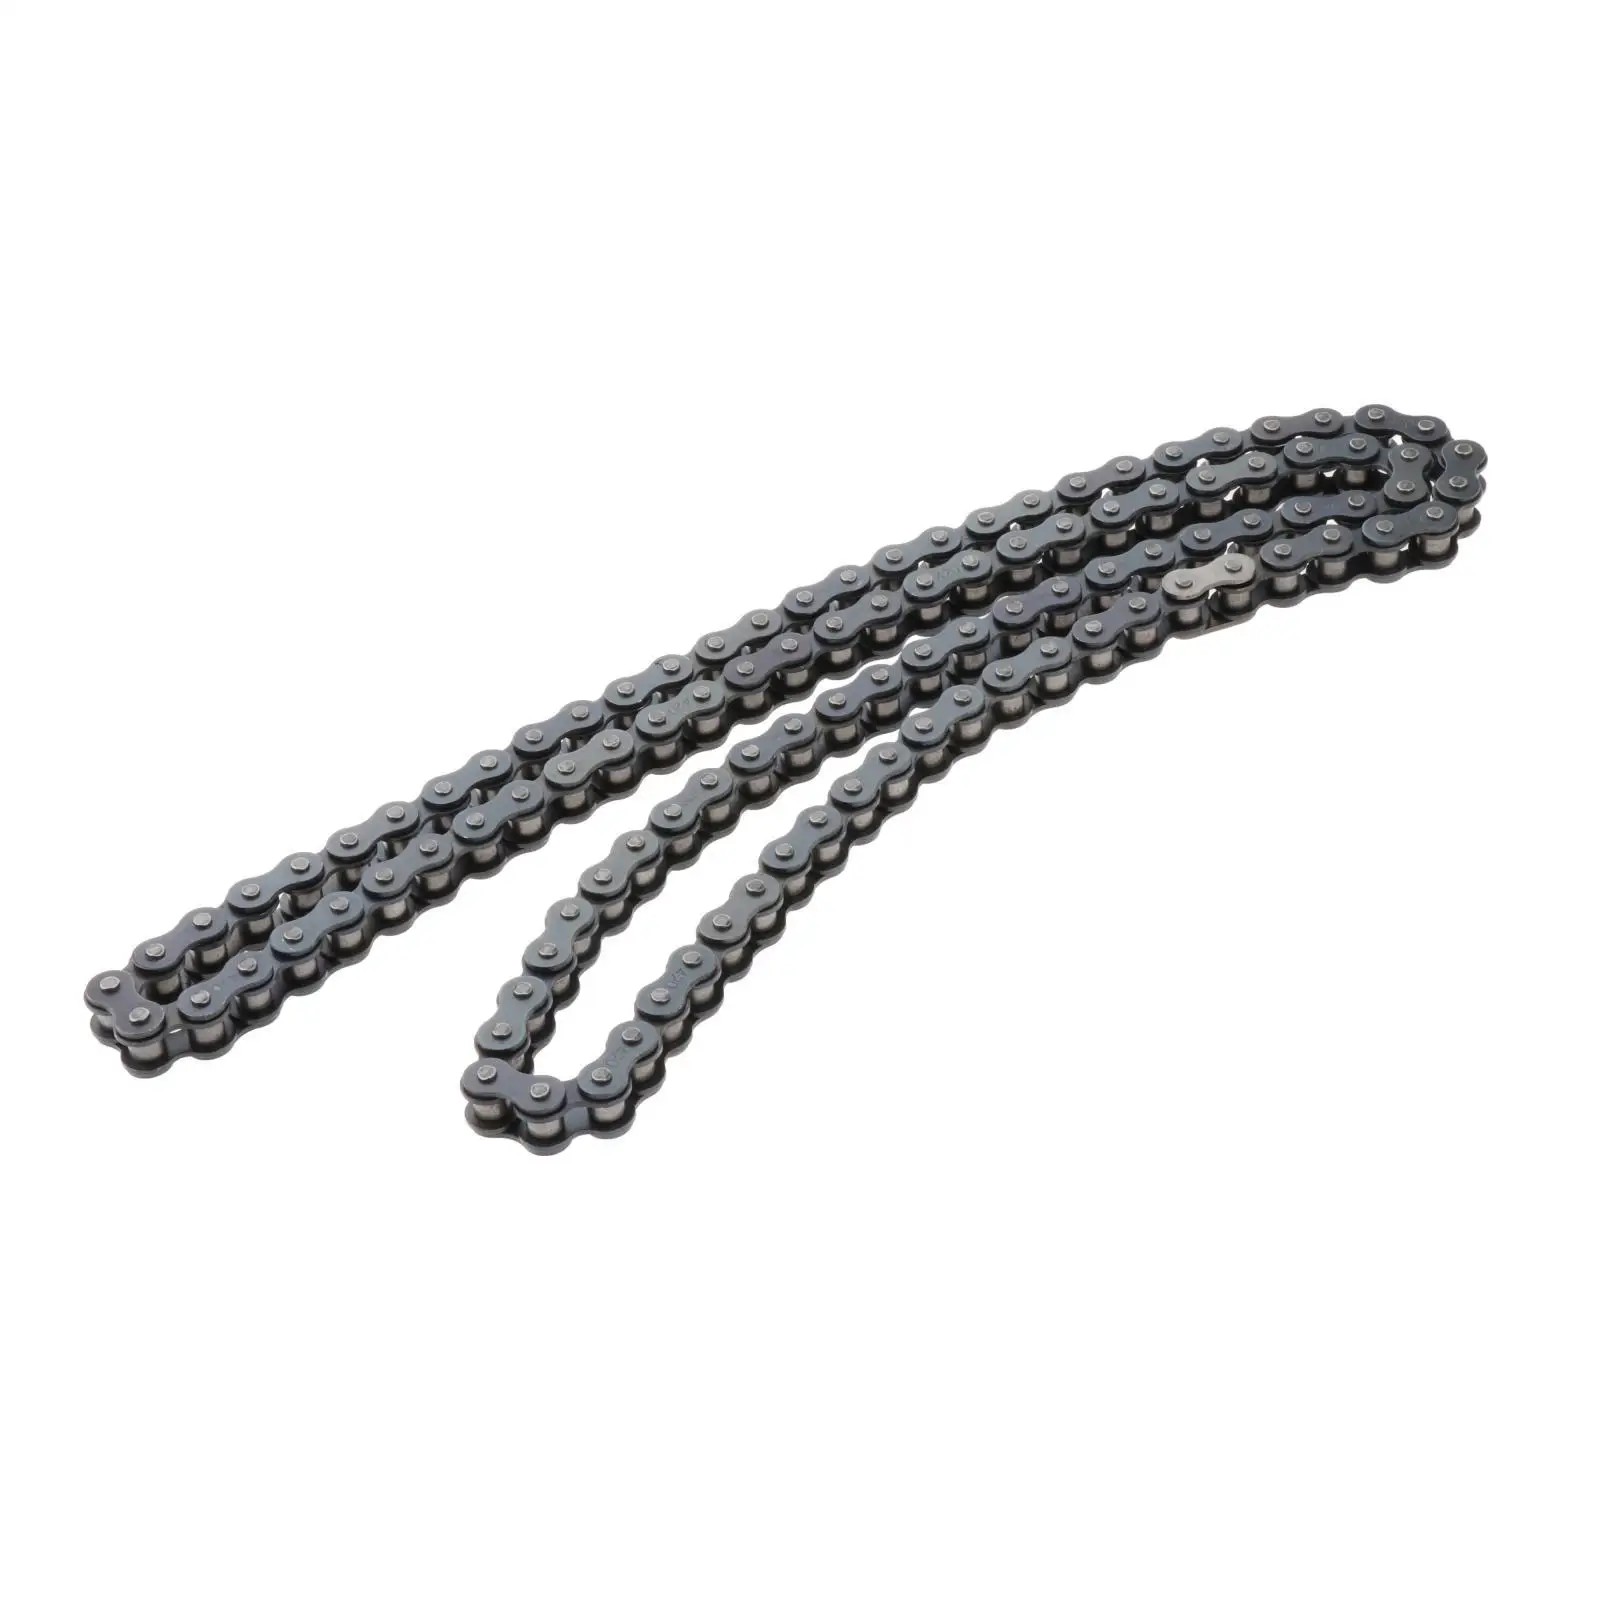 420 Motorcycle Chain 50-110Cc Roller Motorcycle Chain Fits for Dirt